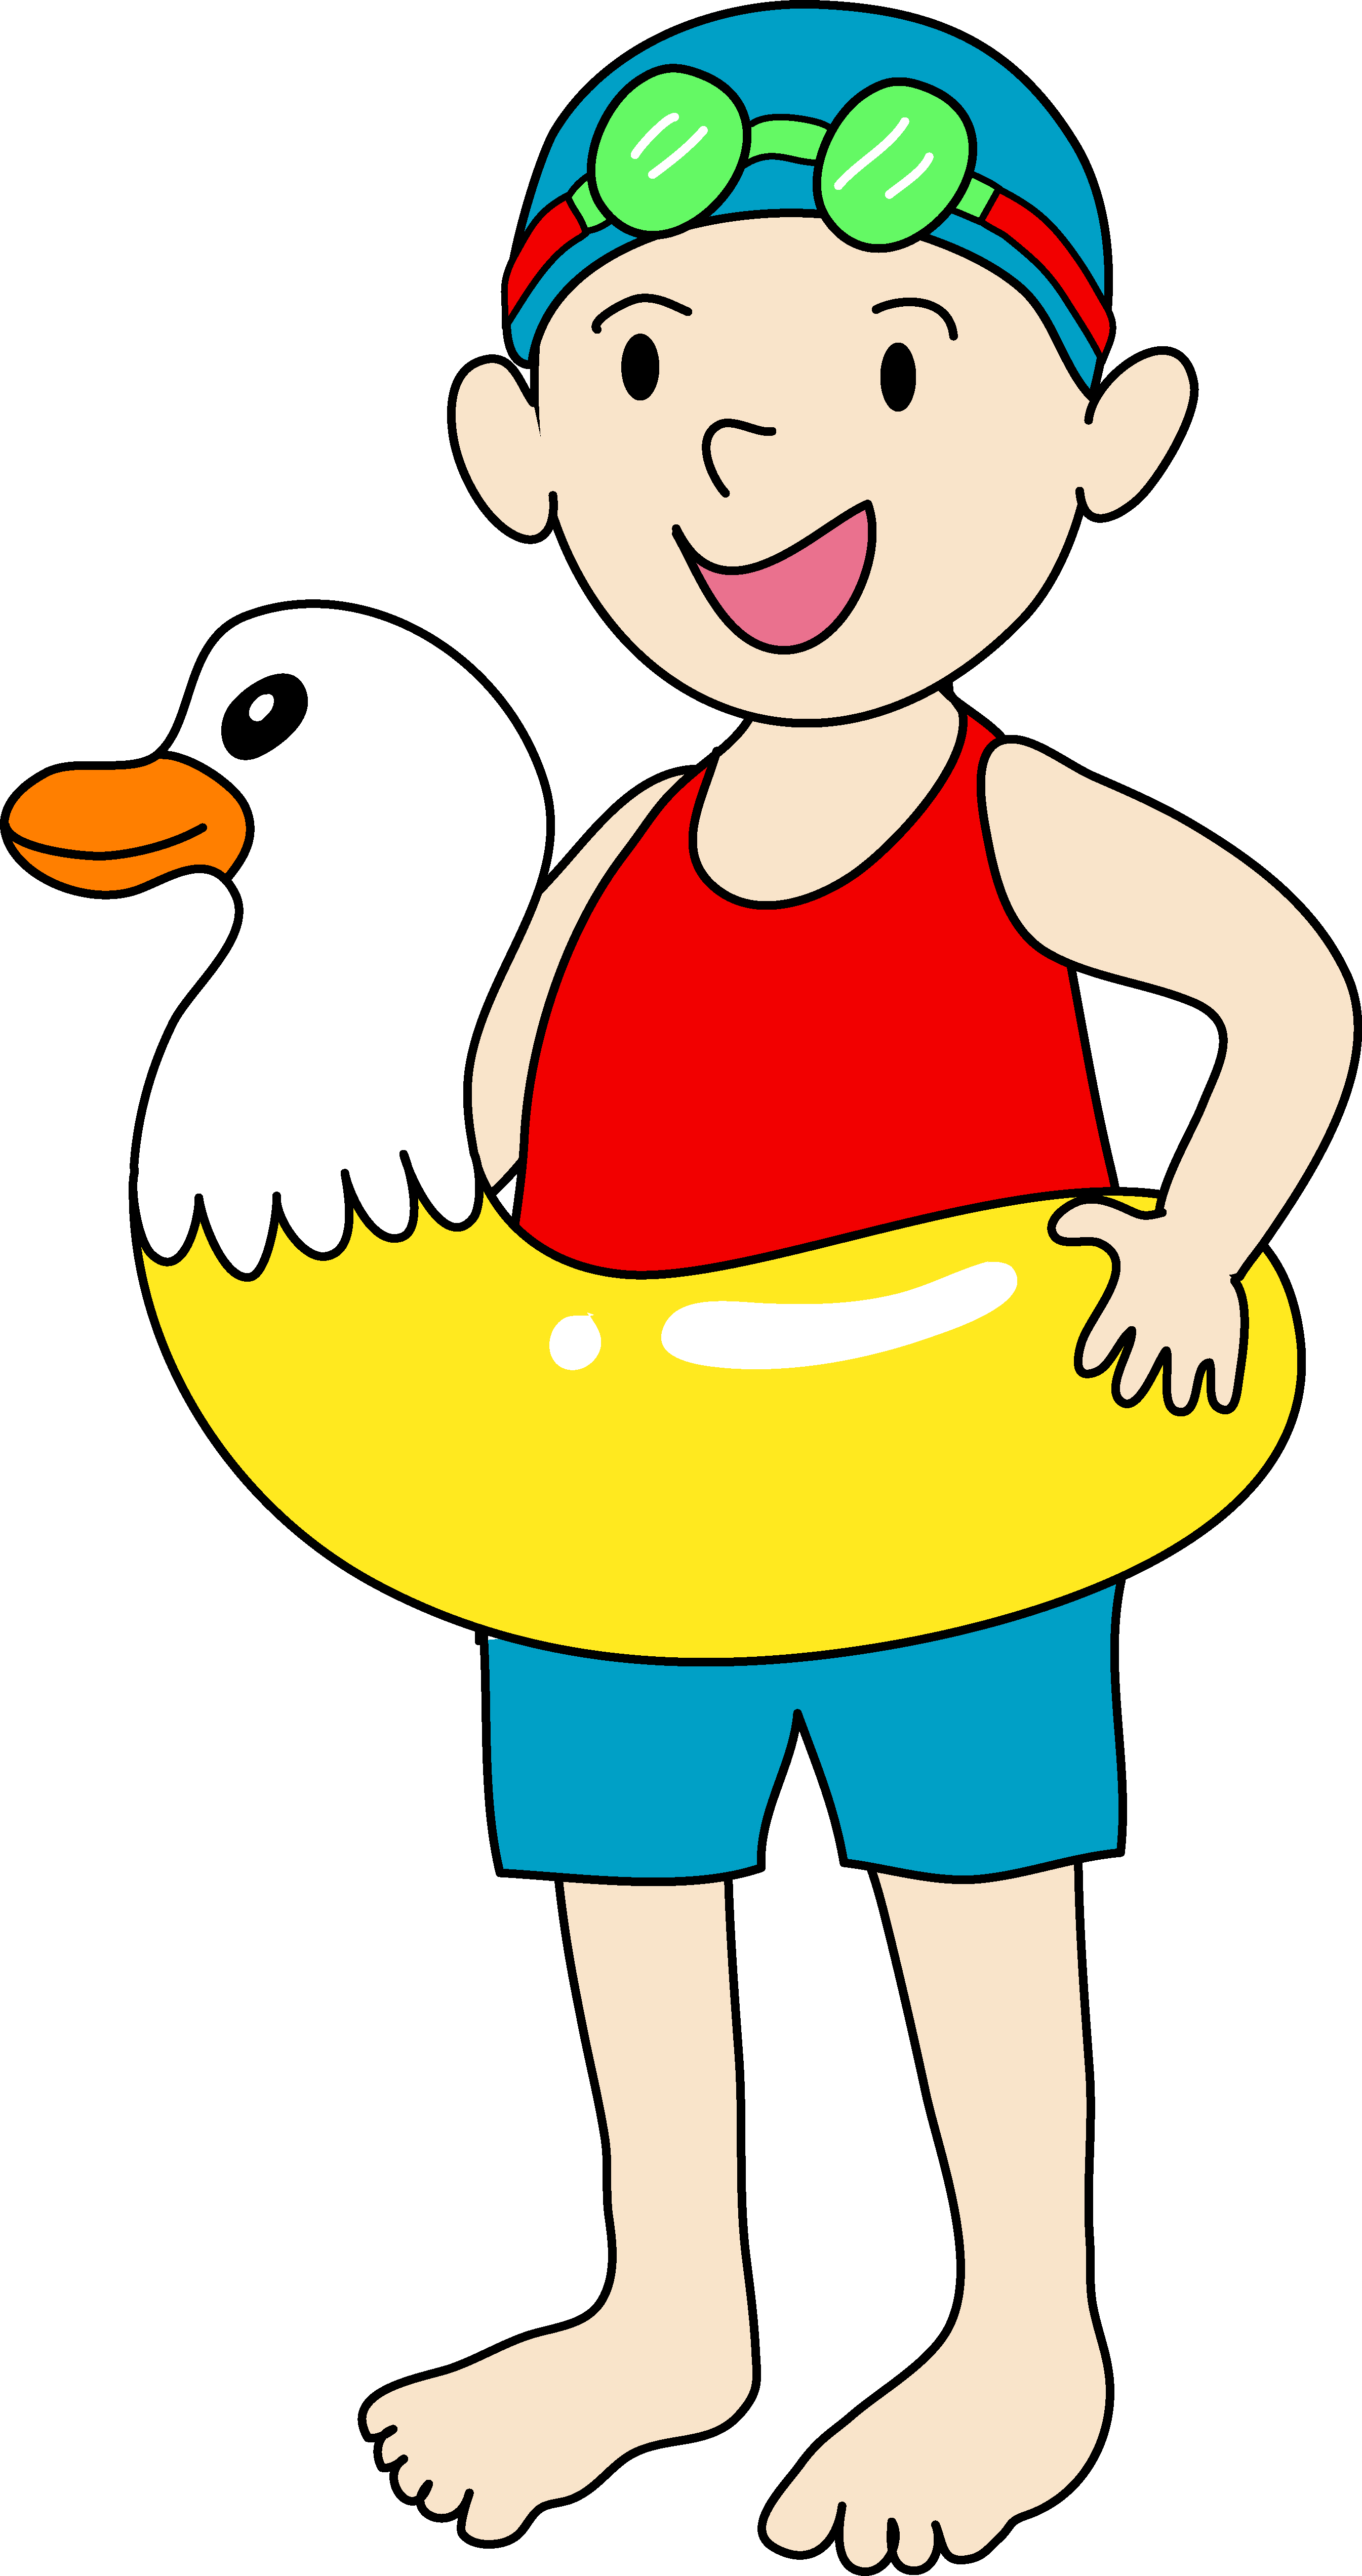 Pool Float Clipart | Clipart Panda - Free Clipart Images